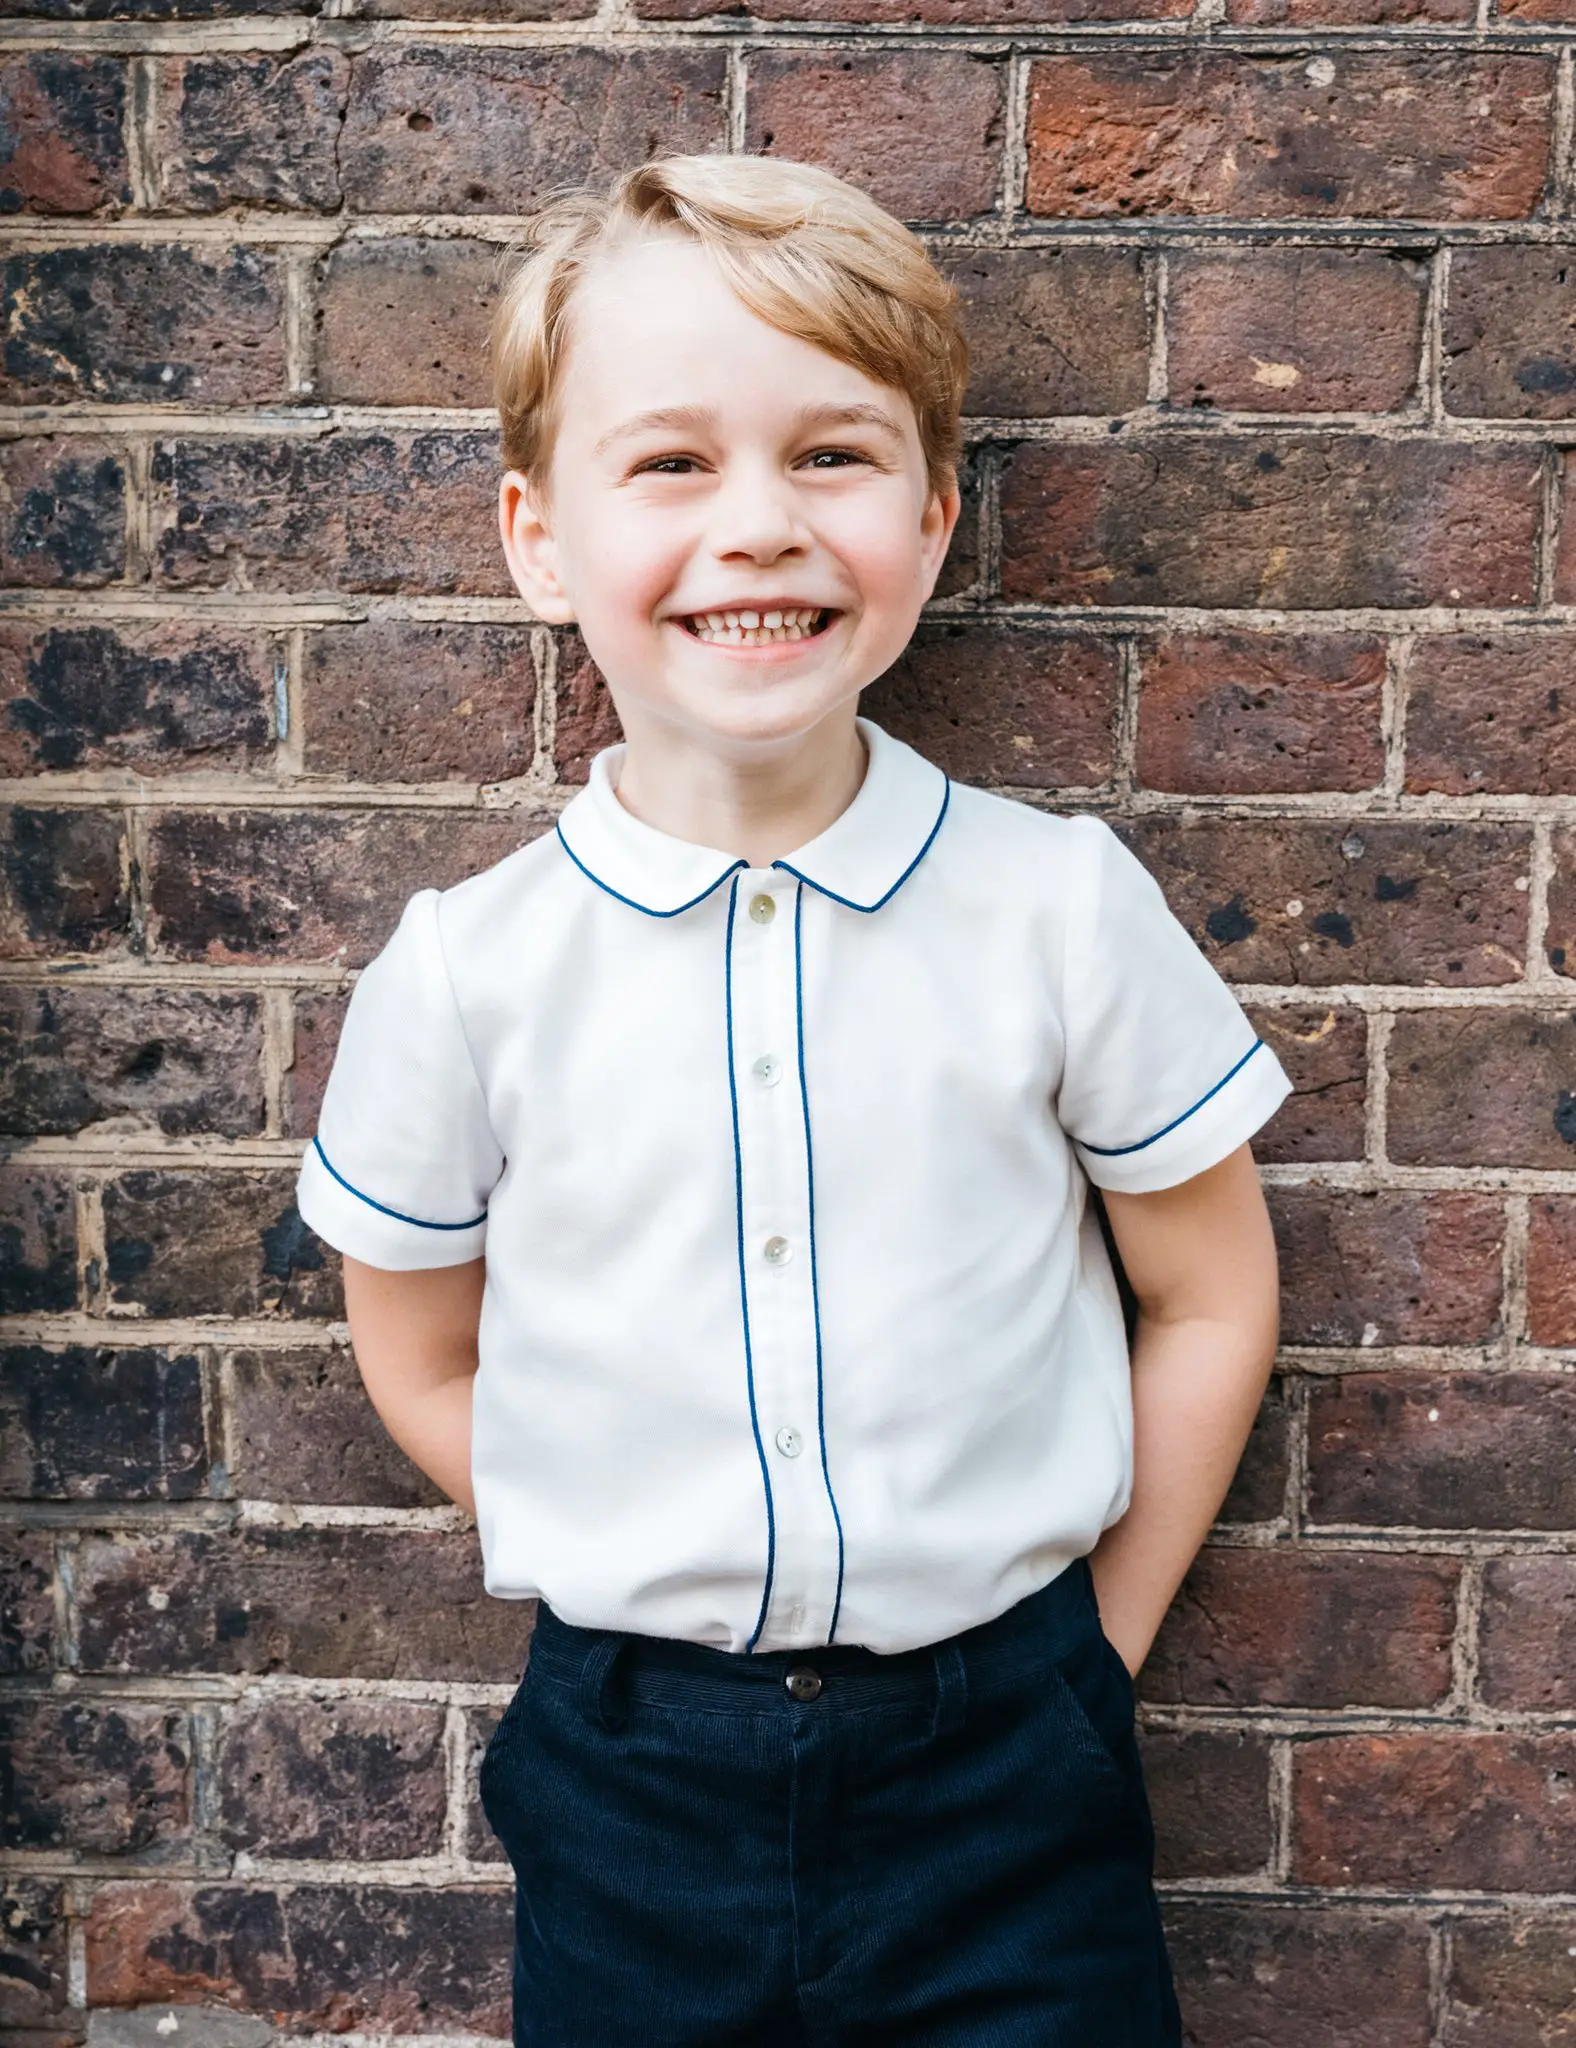 In the year 2017, Prince George's birthday portrait was taken by famous royal Photographer Chris Jackson after his family's Poland and German tour.